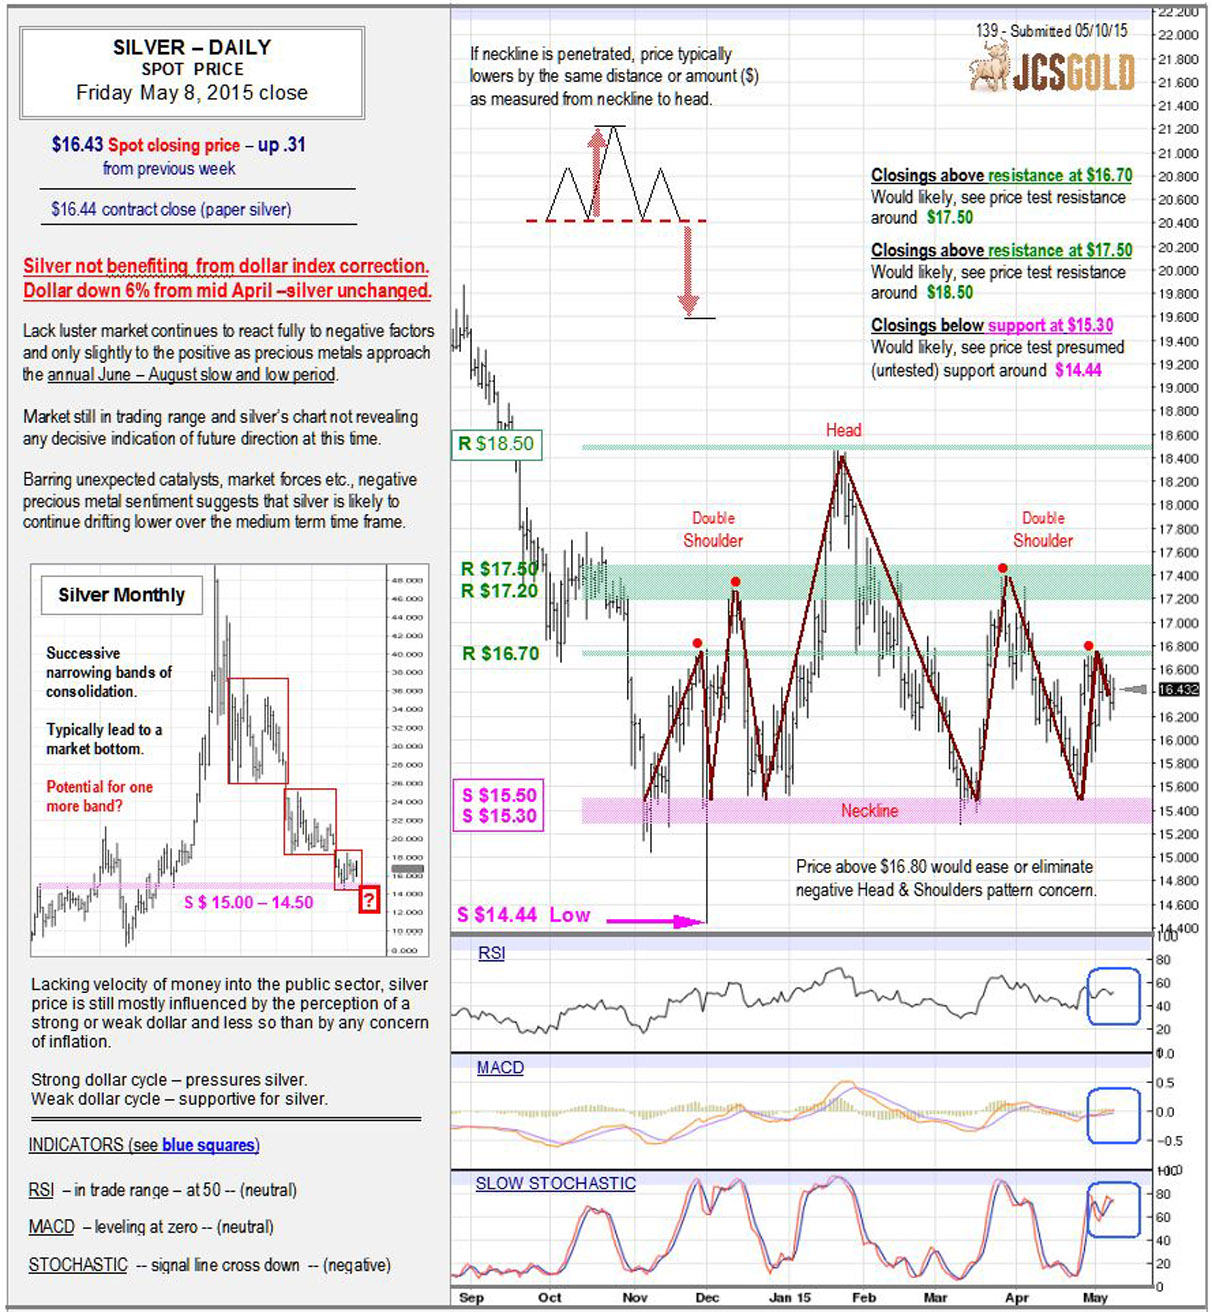 May 8, 2015 chart & commentary